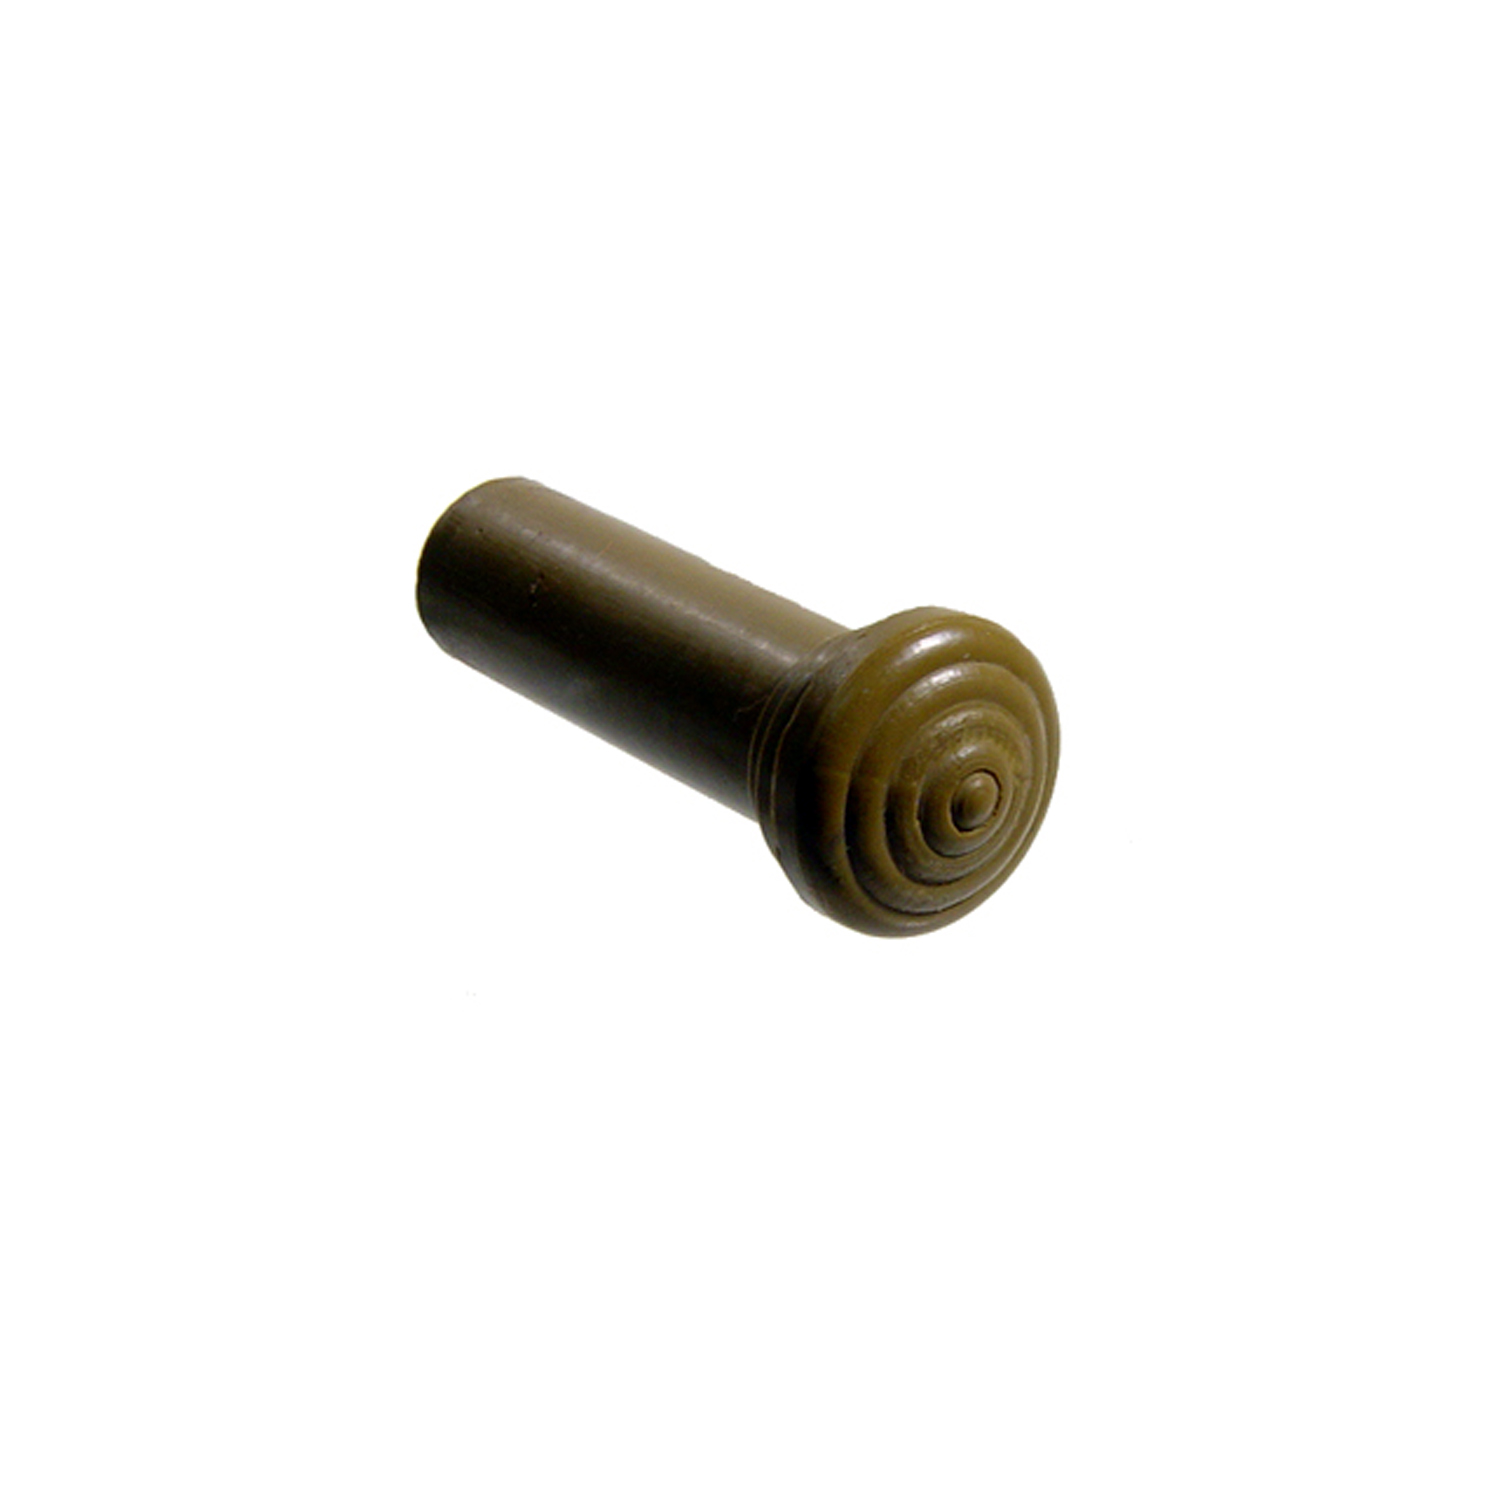 1955 Oldsmobile 88 Door Lock Knob.  Made of Olive Green rubber, self-threading-RP 304-G